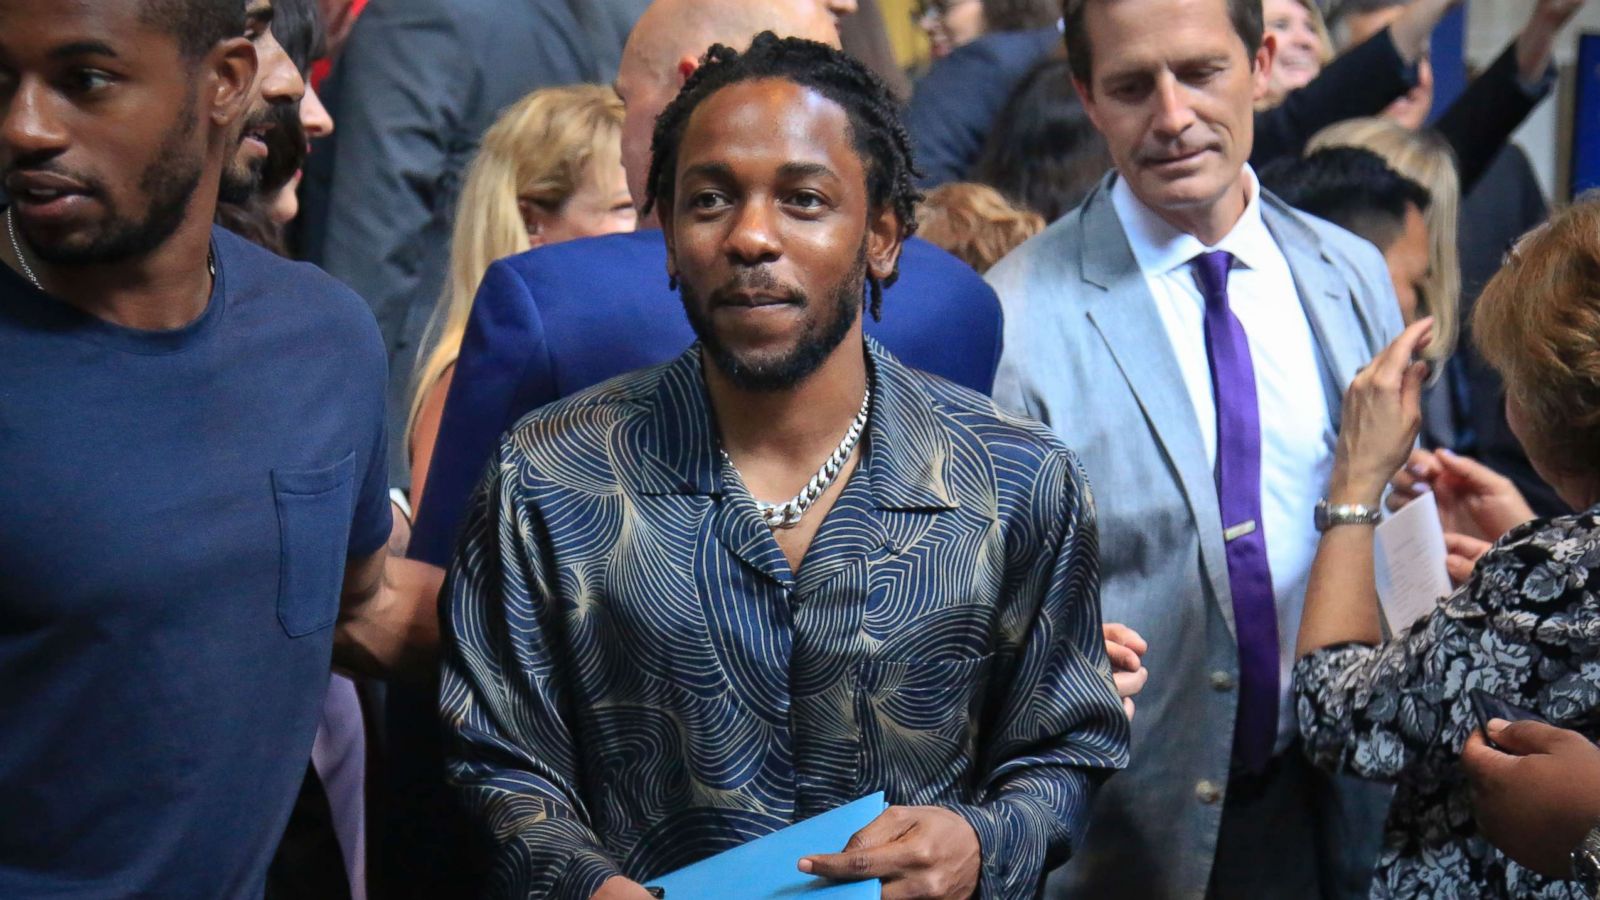 PHOTO: Pulitzer Prize winner for music Kendrick Lamar leaves after accepting his award for his album "DAMN," at the 2018 Pulitzer Prize awards luncheon at Columbia University, May 30, 2018, in New York.